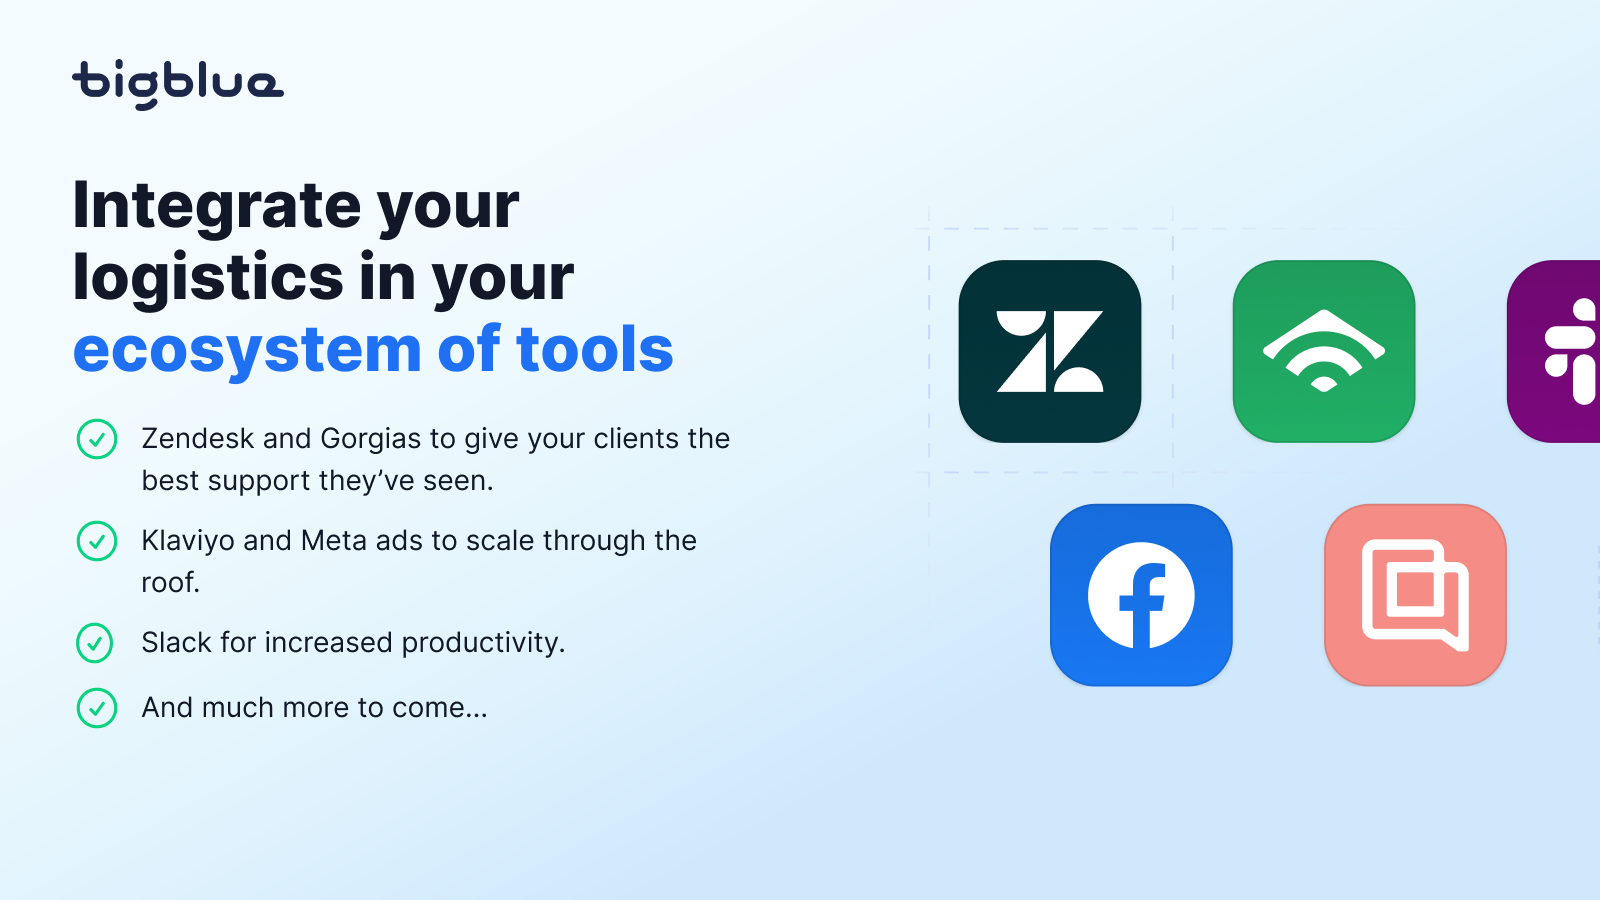 Integrate to your ecosystem of tools